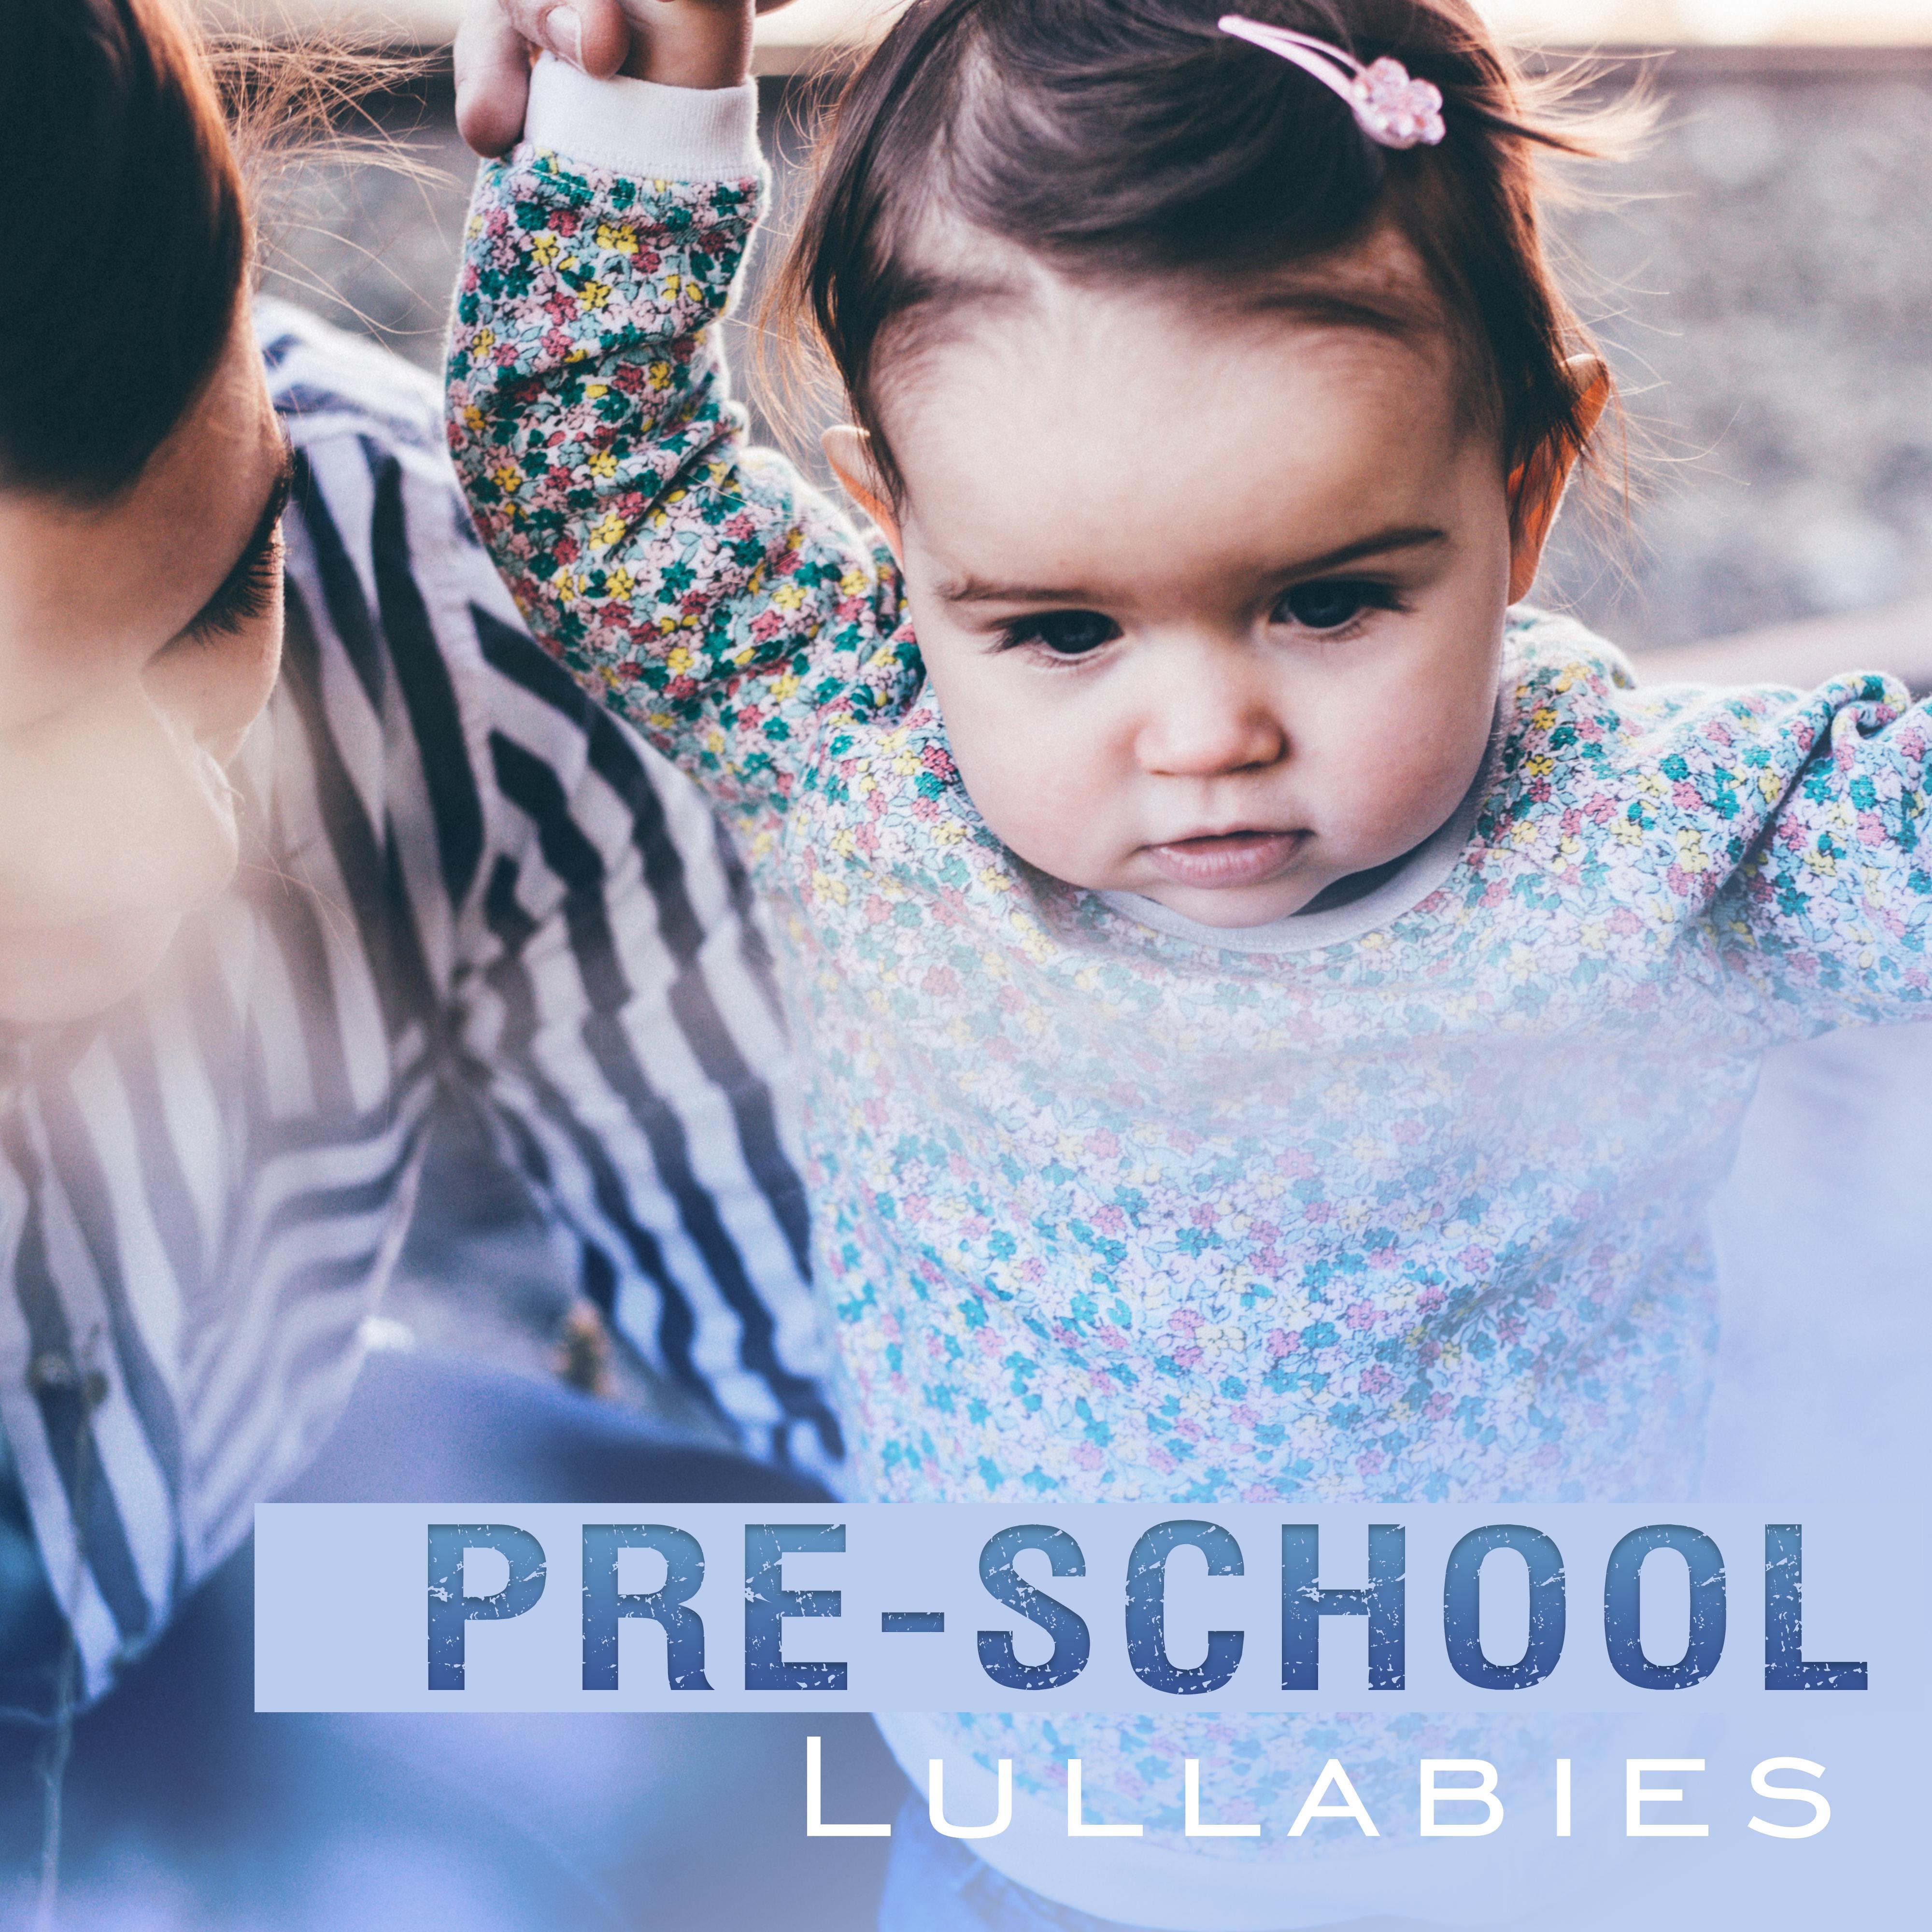 Pre-school Lullabies – Lullabies for Babies, Bedtime Relaxation, Calming Nature Sounds, Music for Babies, Calm Down Baby Before Sleep